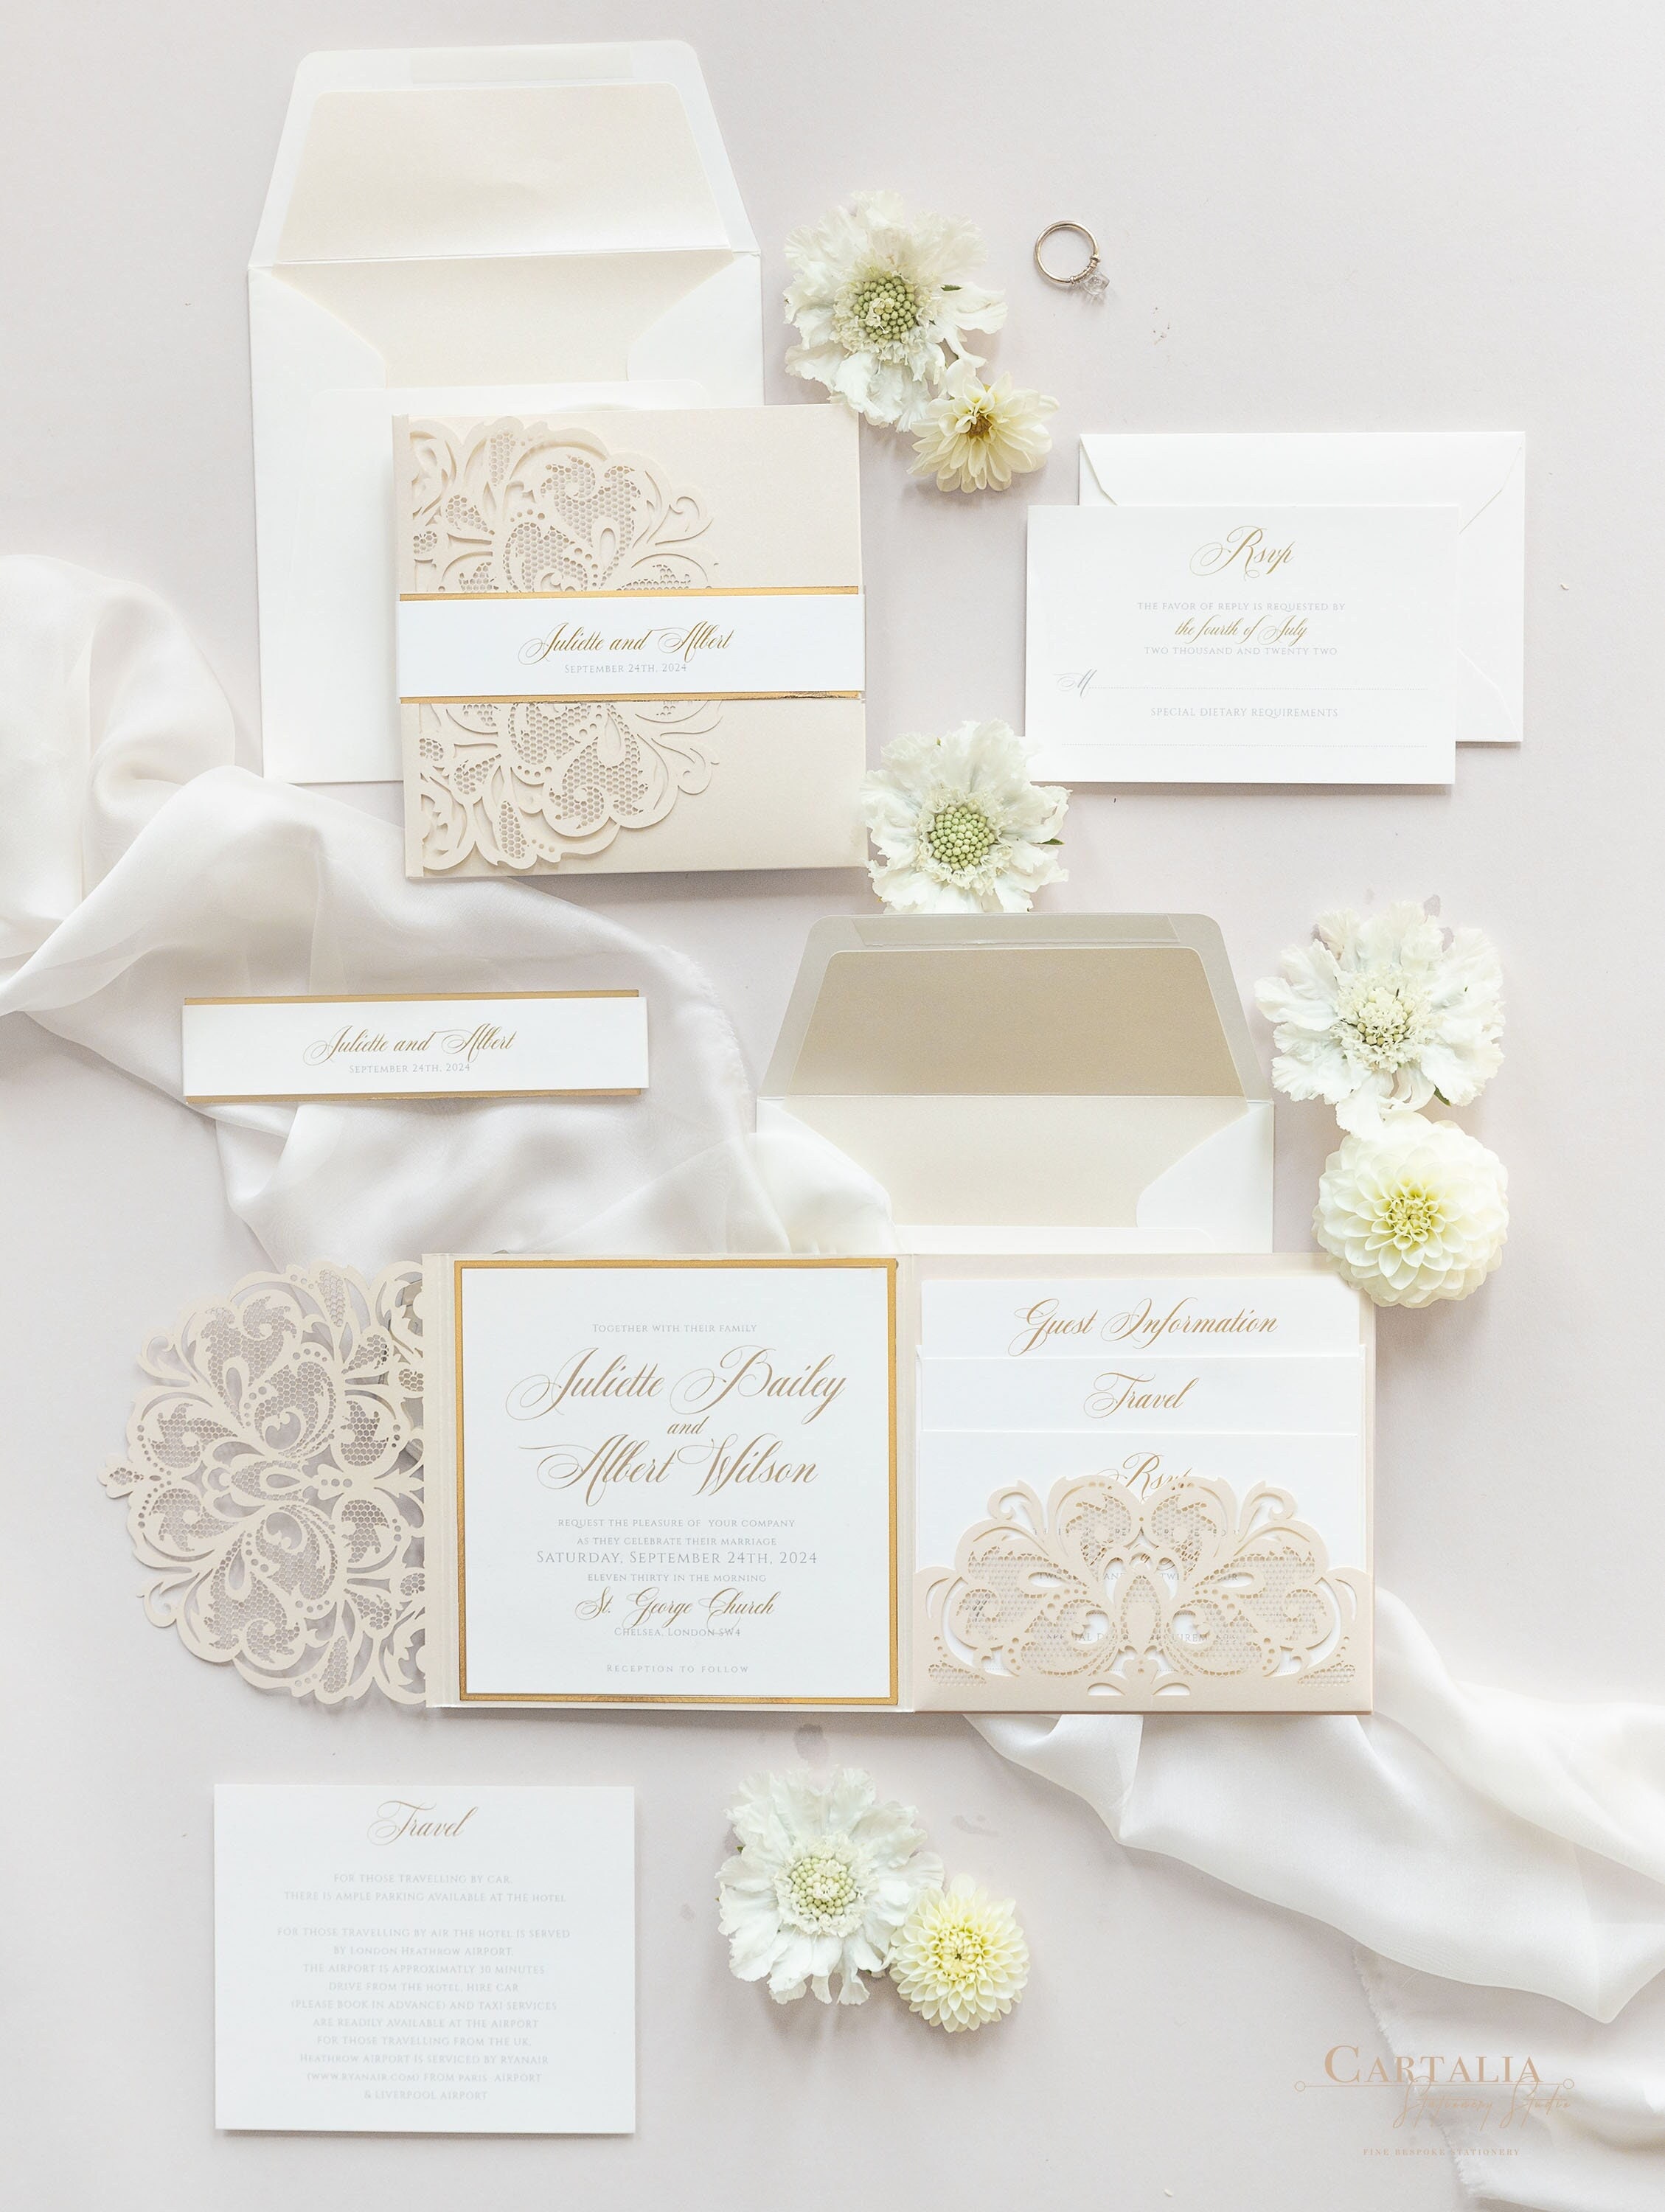 Navy Blue Square Elegant Wedding Invitations with Envelopes Laser Cut Cards Floral Lace DIY set with Cream Insert and Gold Glitter PRE-PRINTED SAMPLE! 